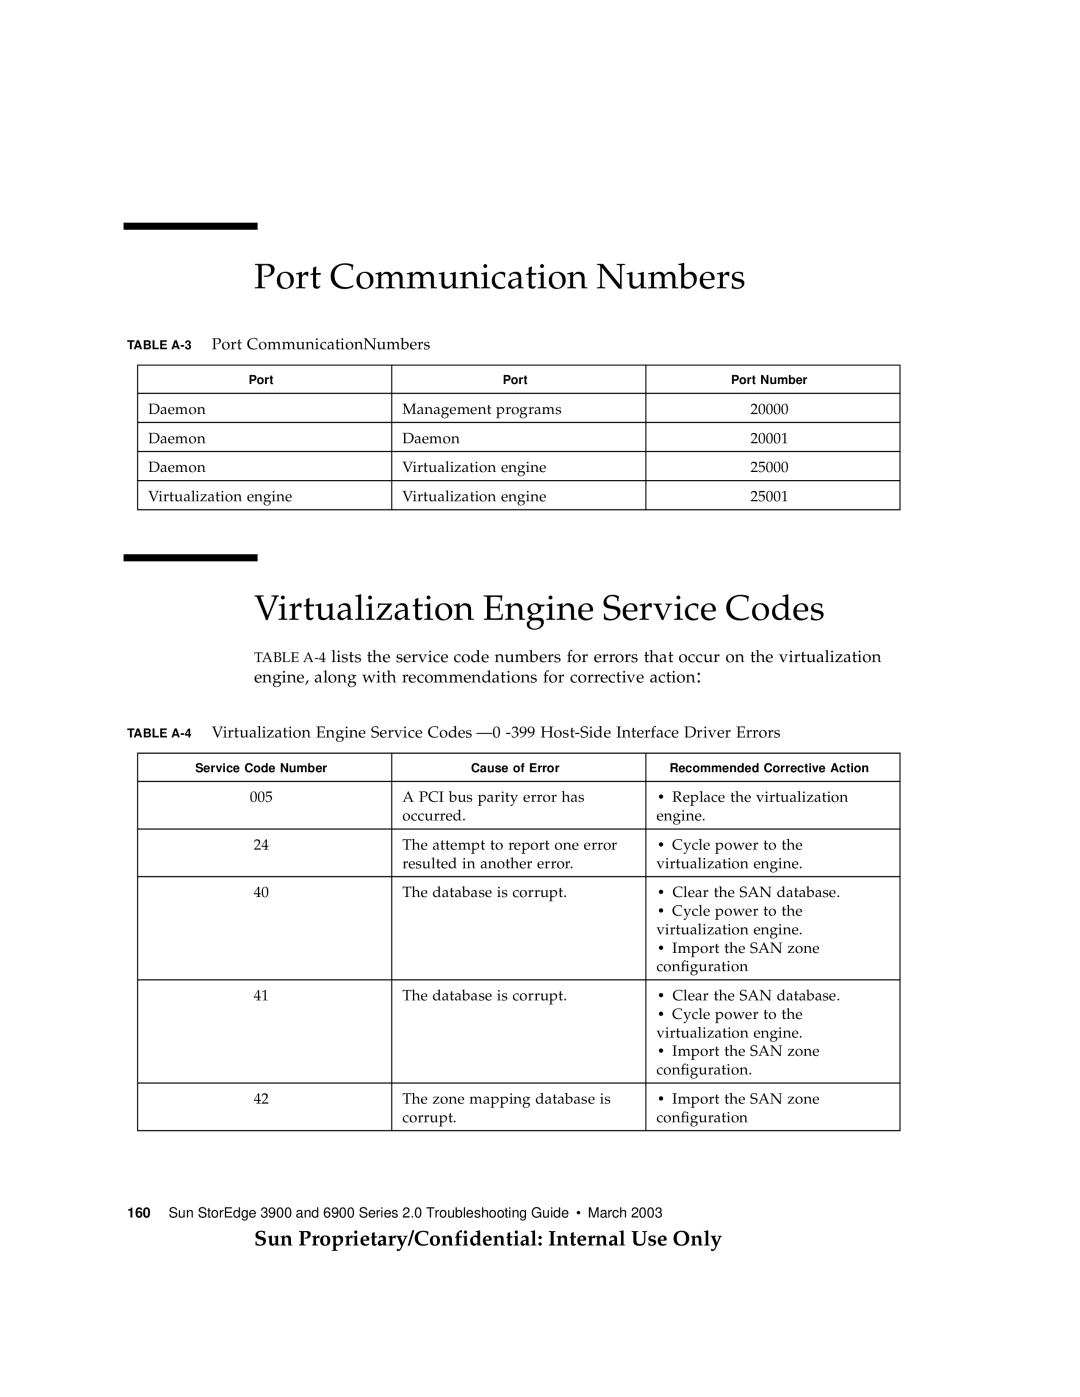 Sun Microsystems 3900 Port Communication Numbers, Virtualization Engine Service Codes, TABLE A-3 Port CommunicationNumbers 